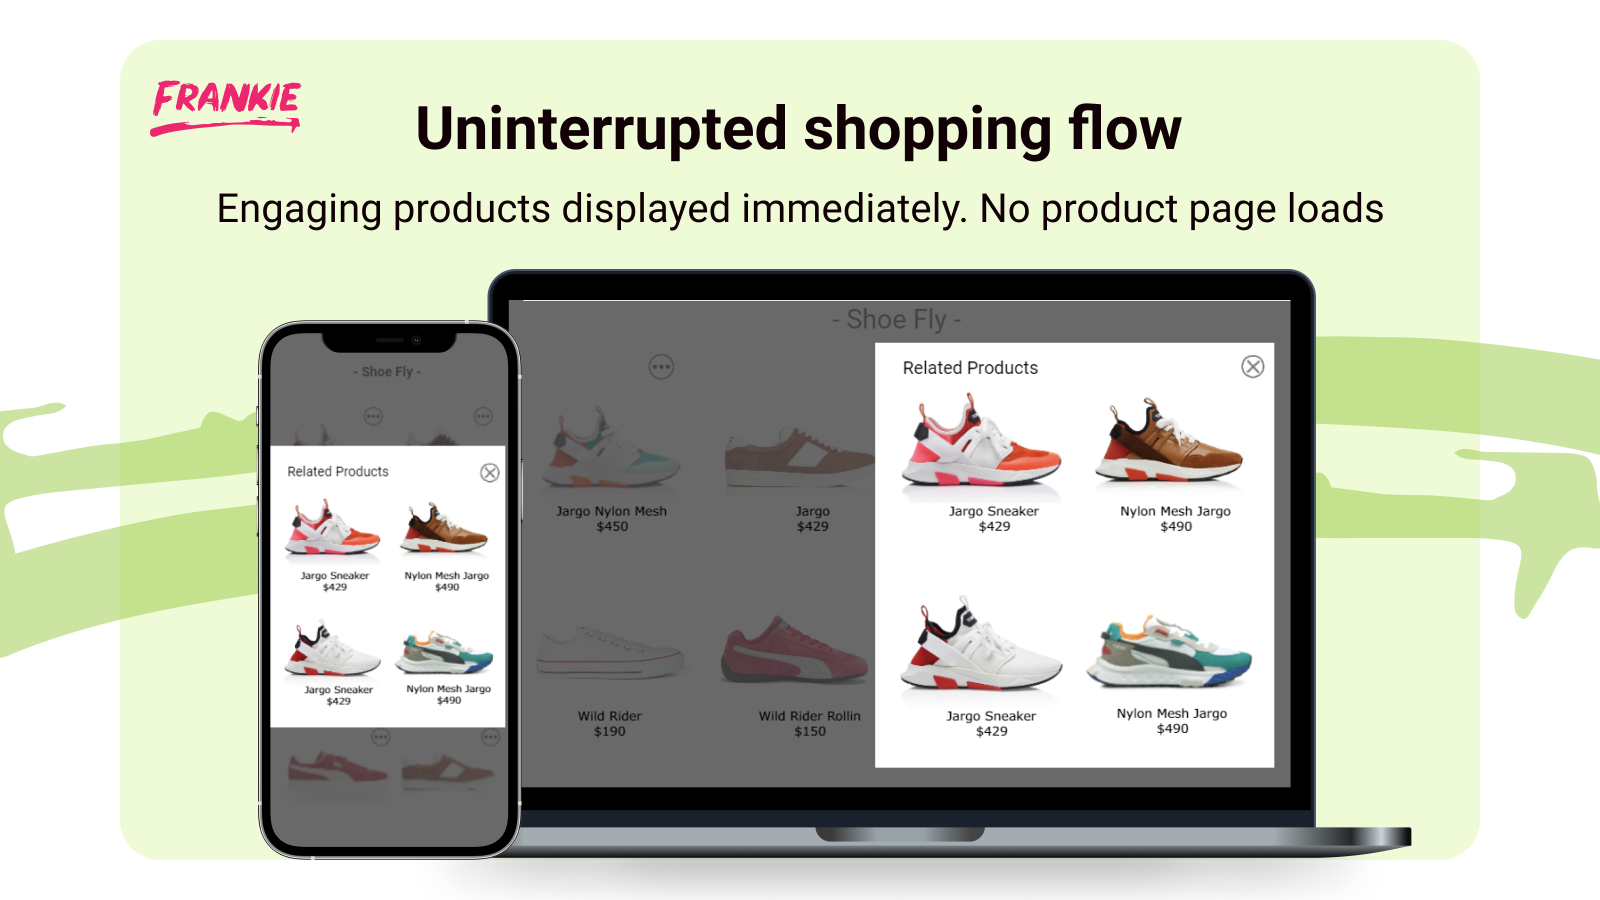 Inline immediately displays product recommendations